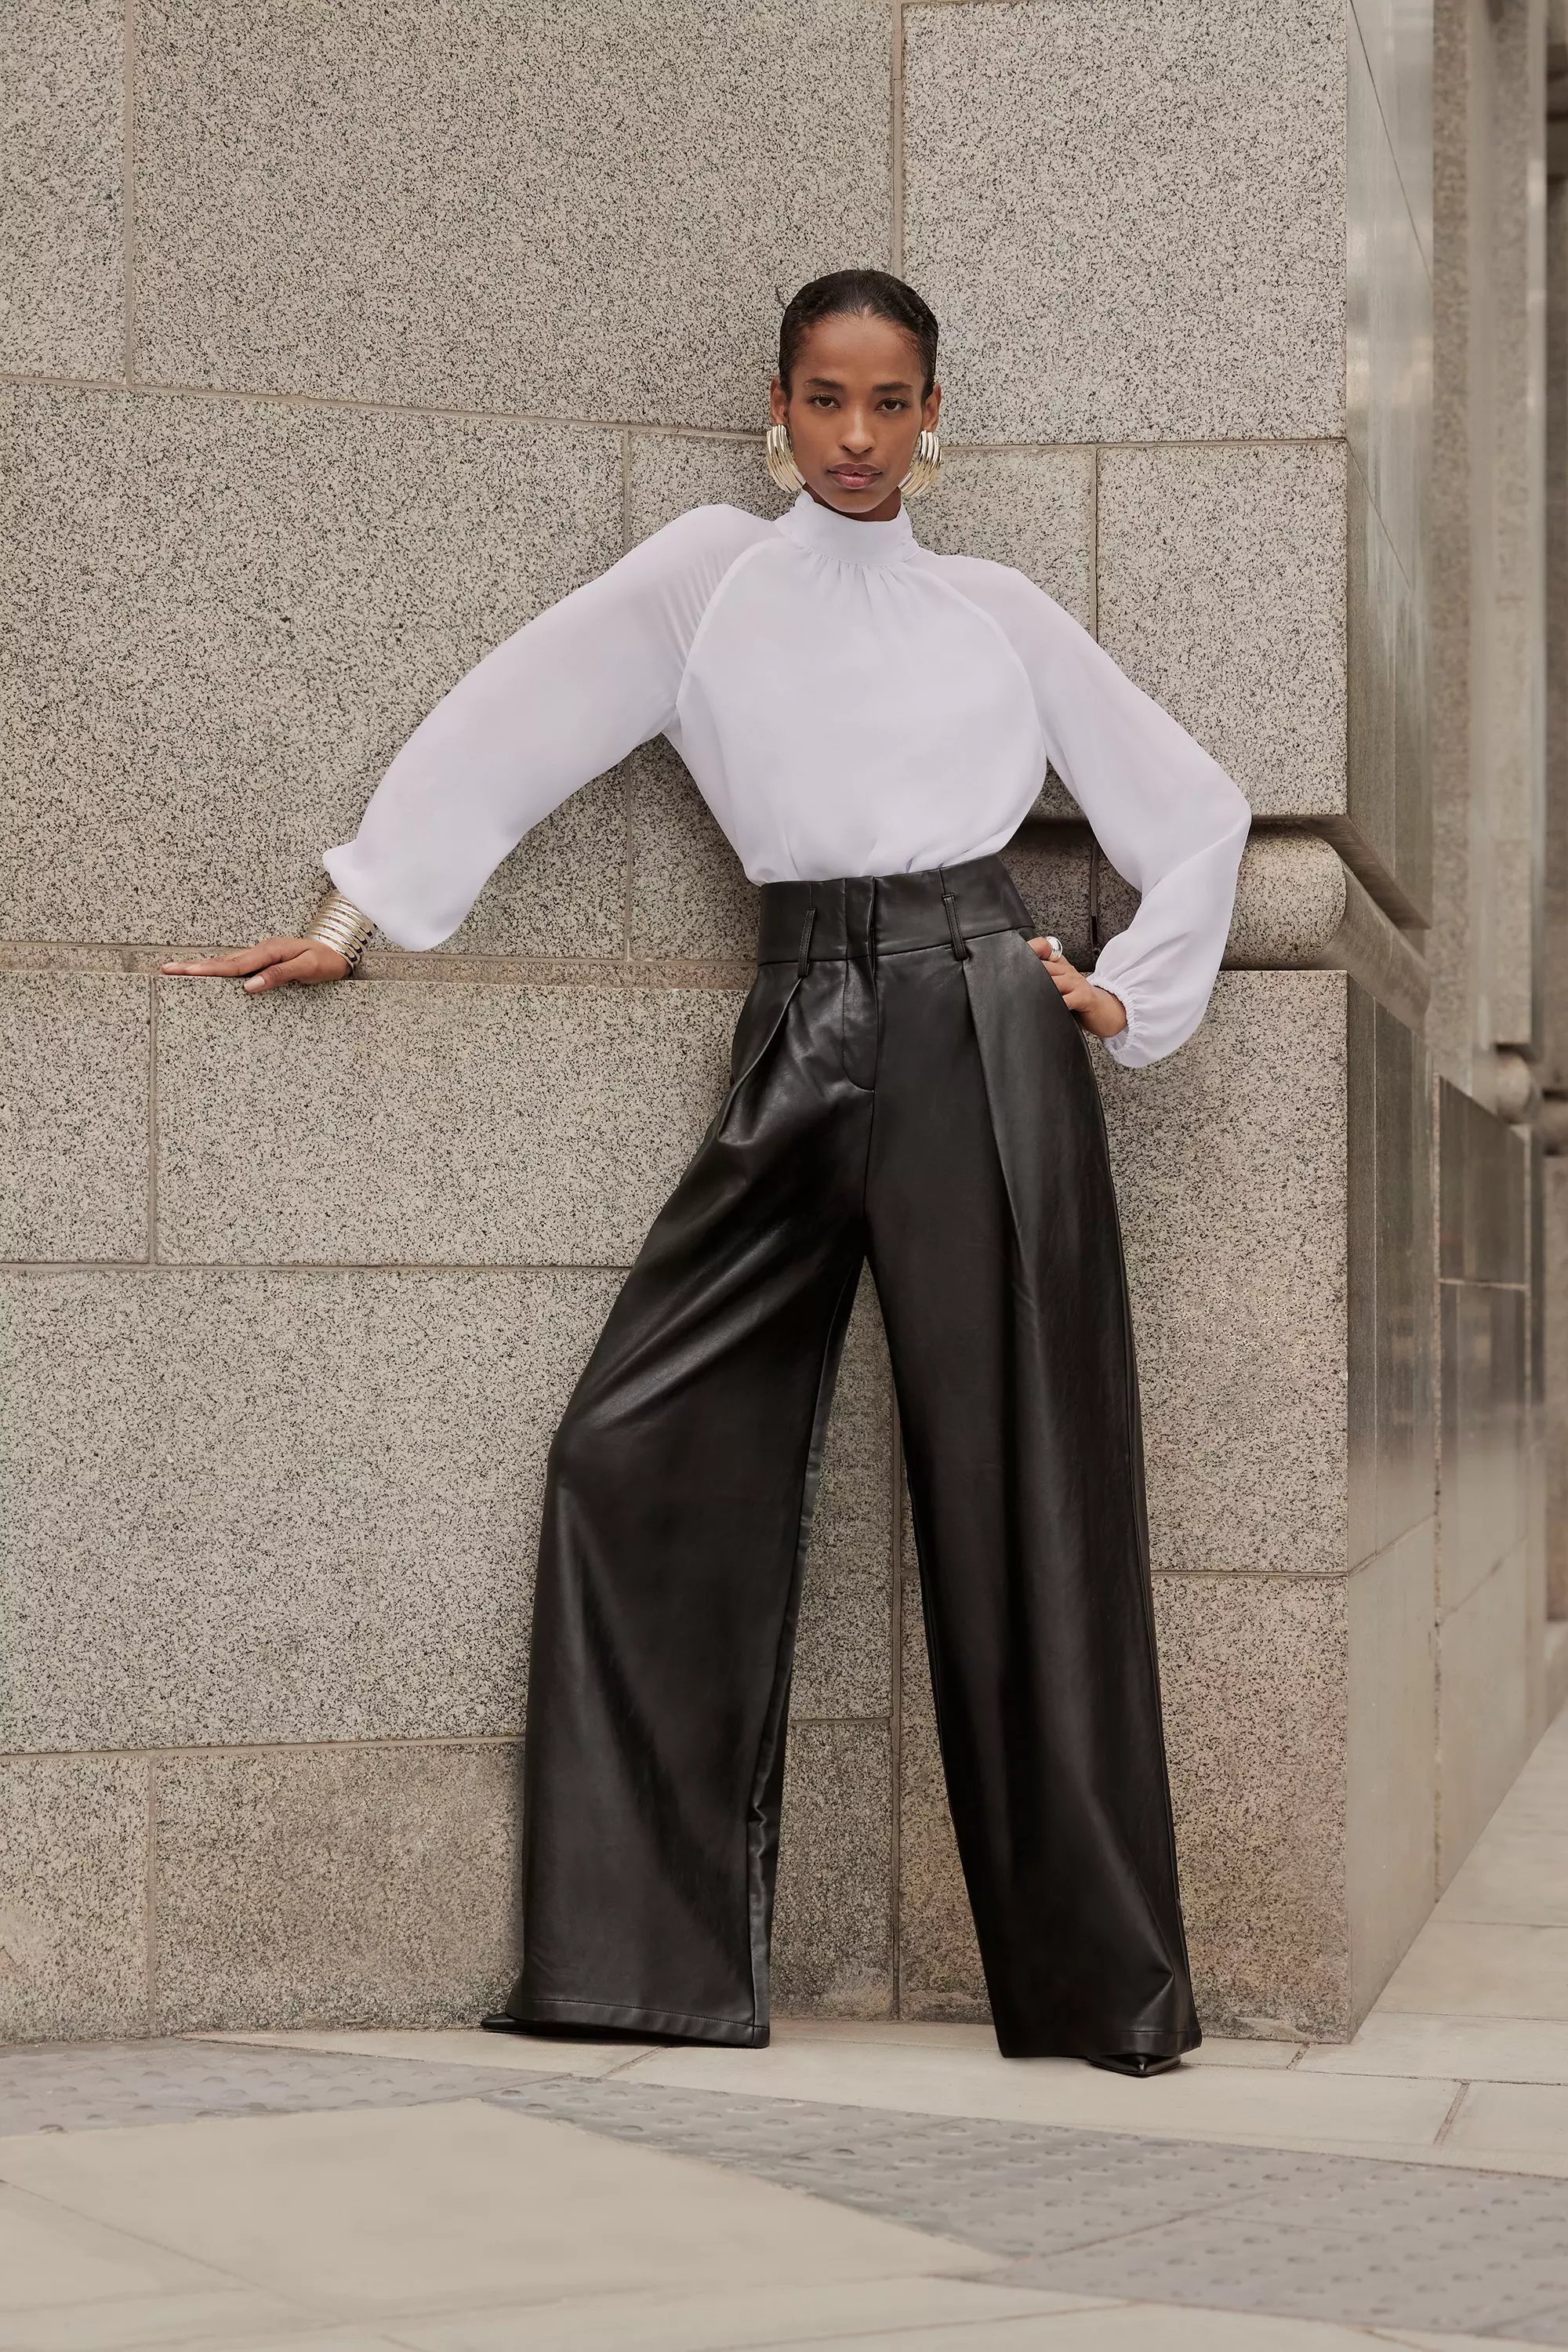 FAUX LEATHER BAGGY TROUSERS - Black